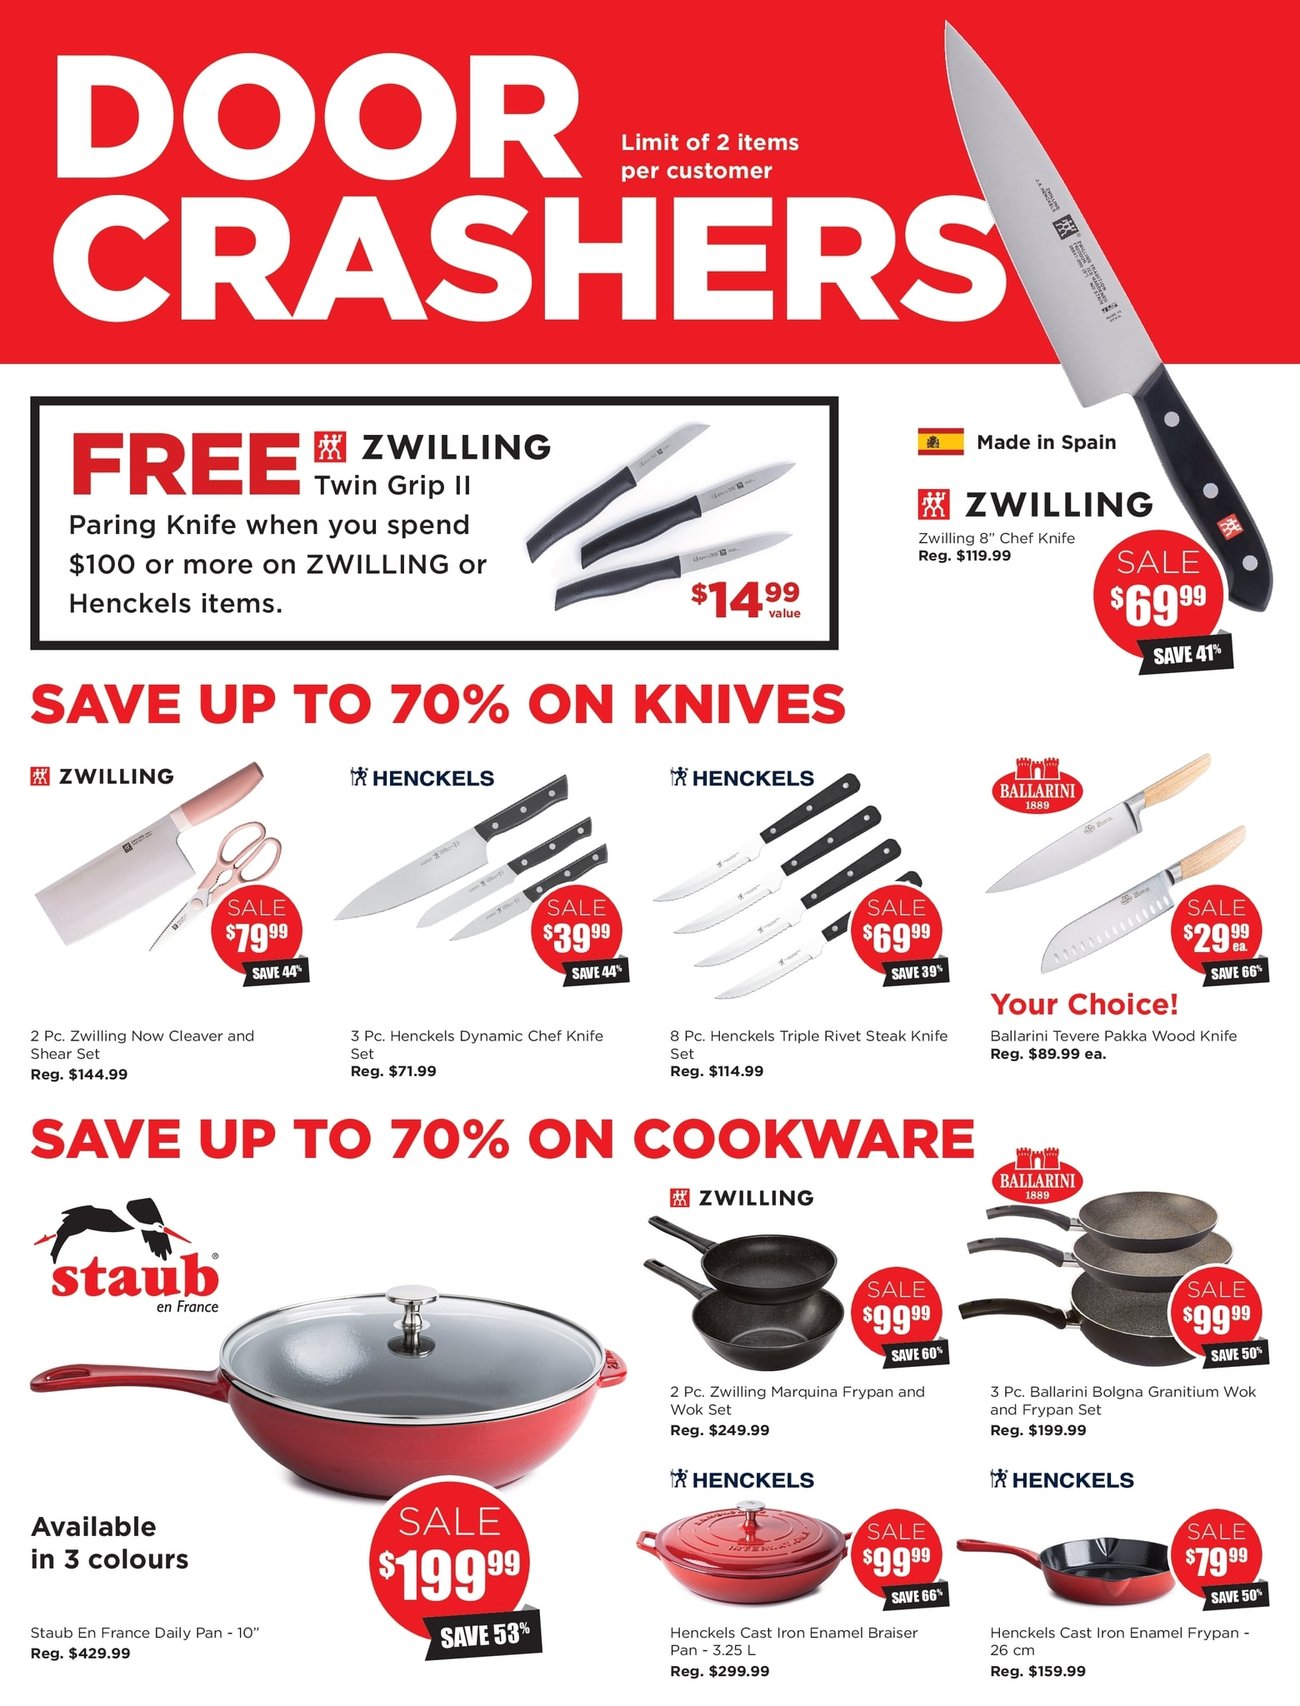 Kitchen Stuff Plus - Everything Cooking Sale - Page 2